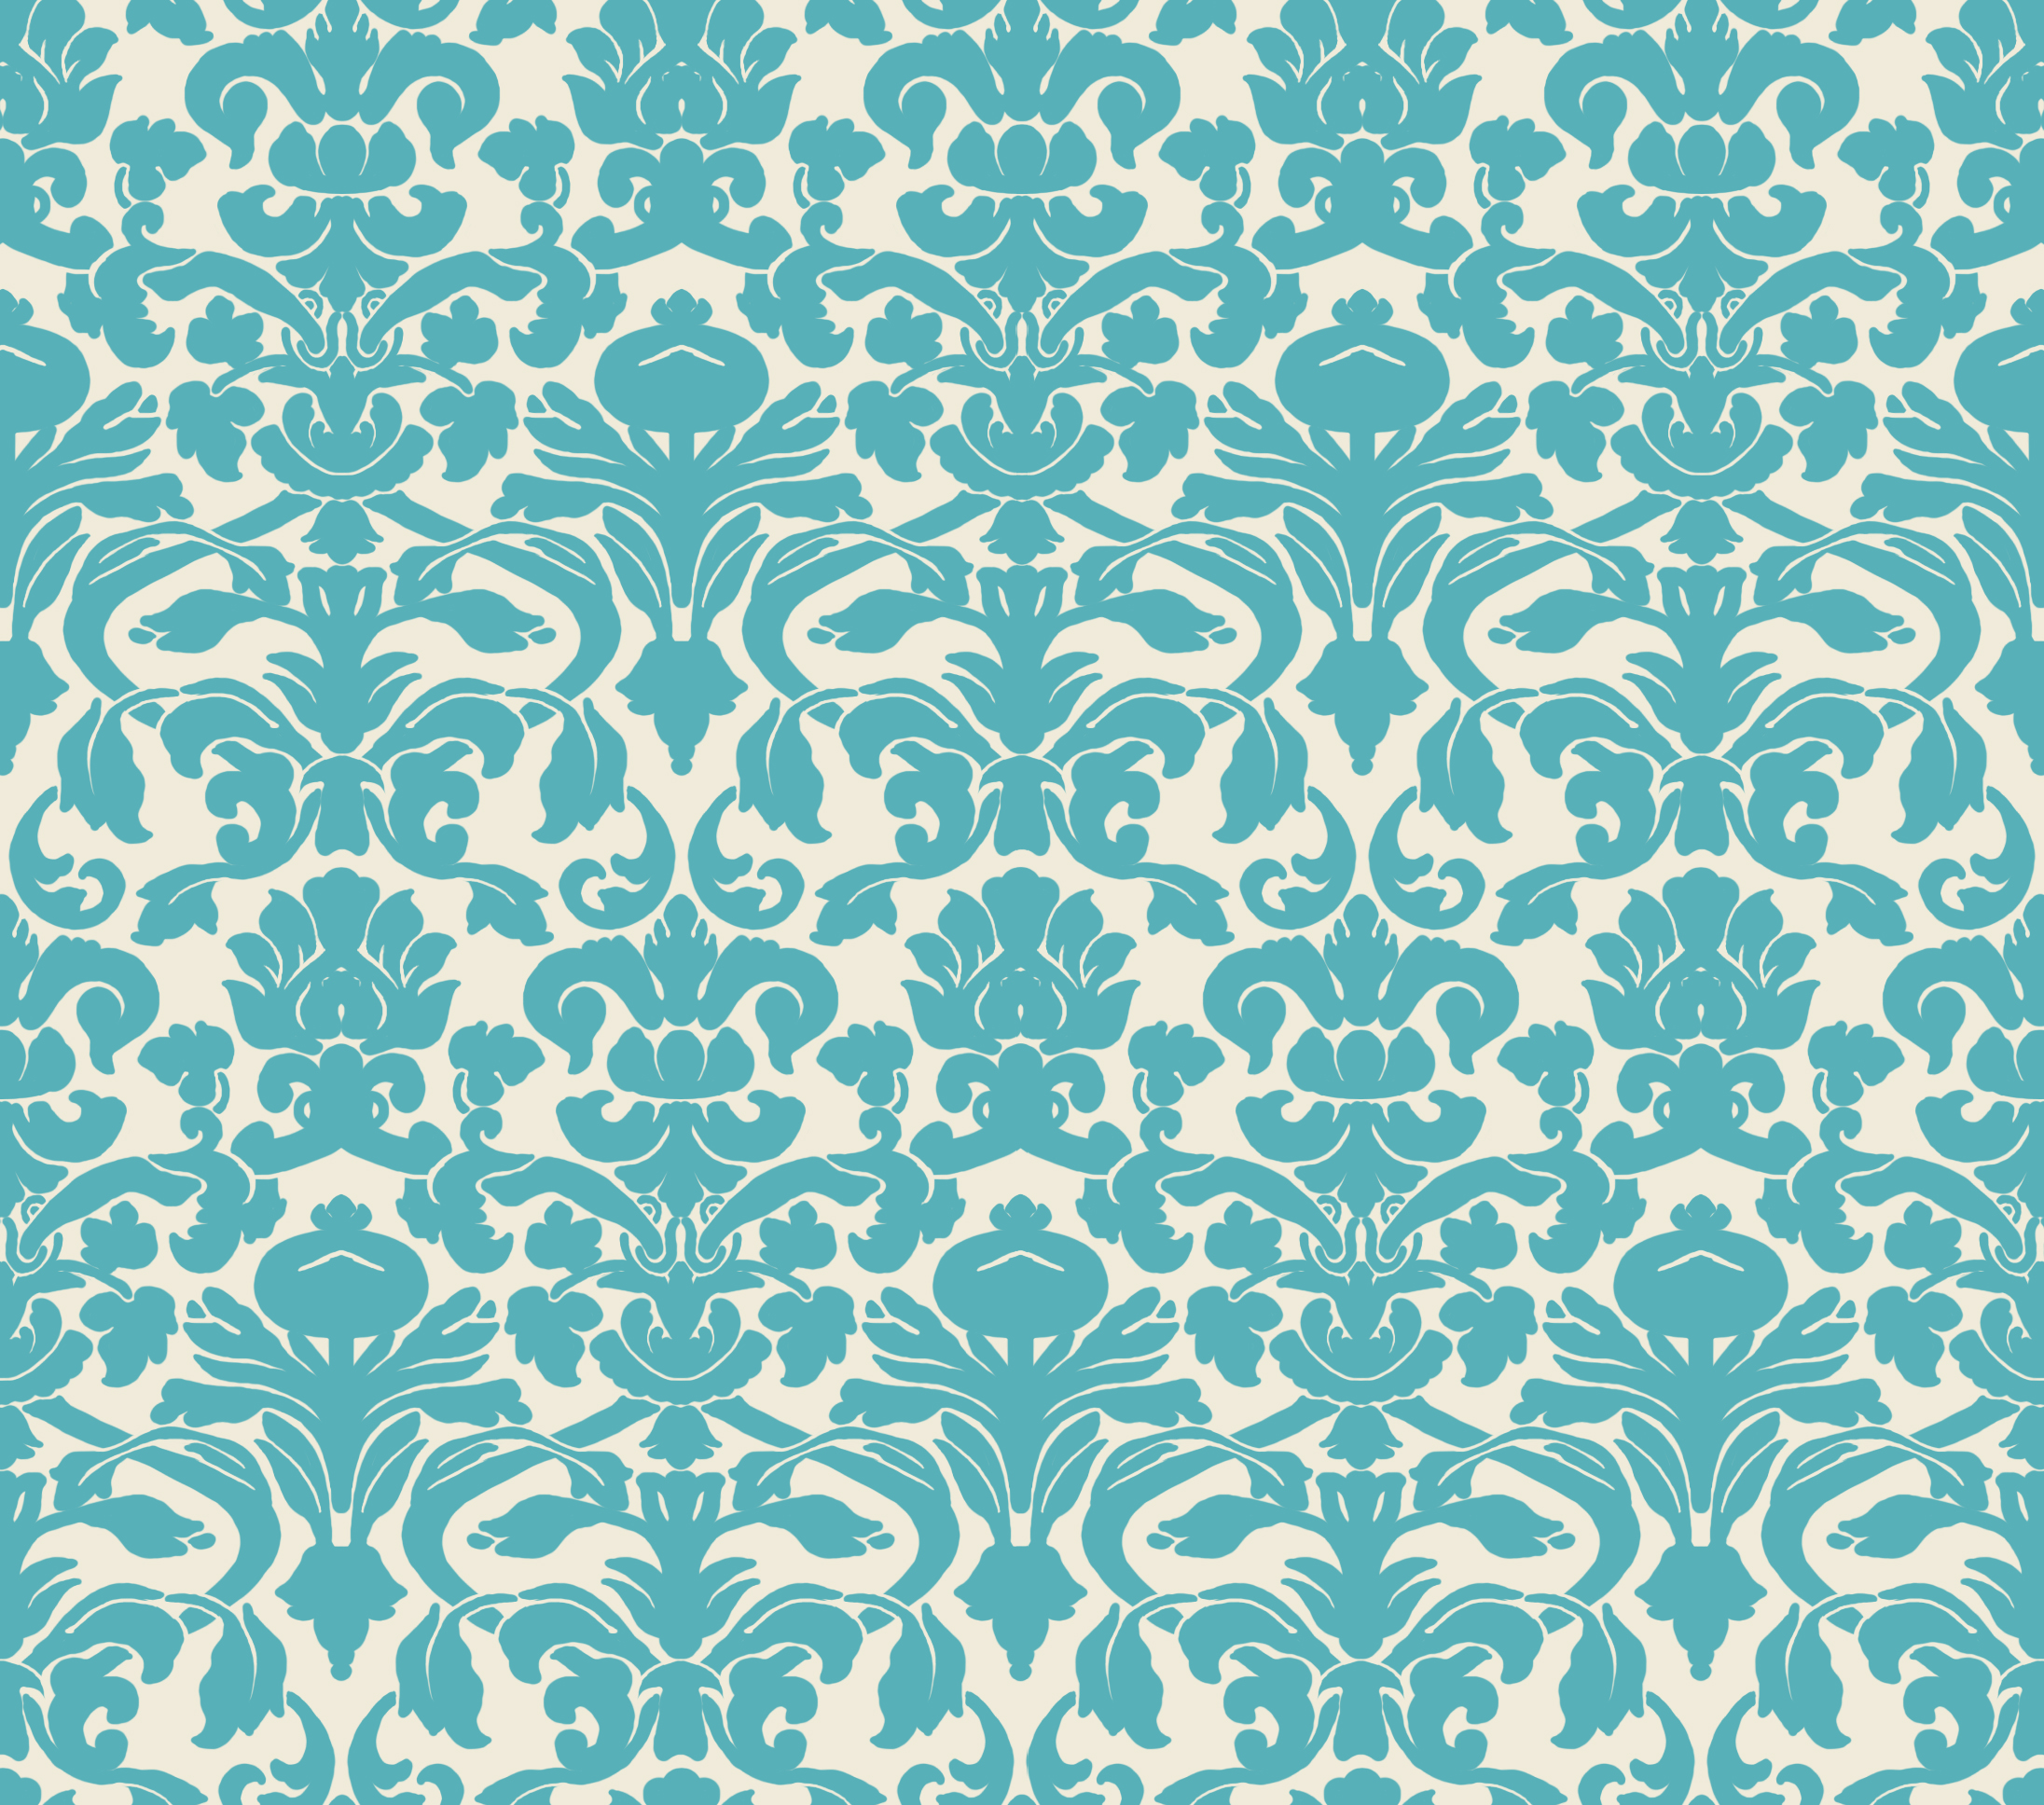 damask wallpaper by insurrectionx on